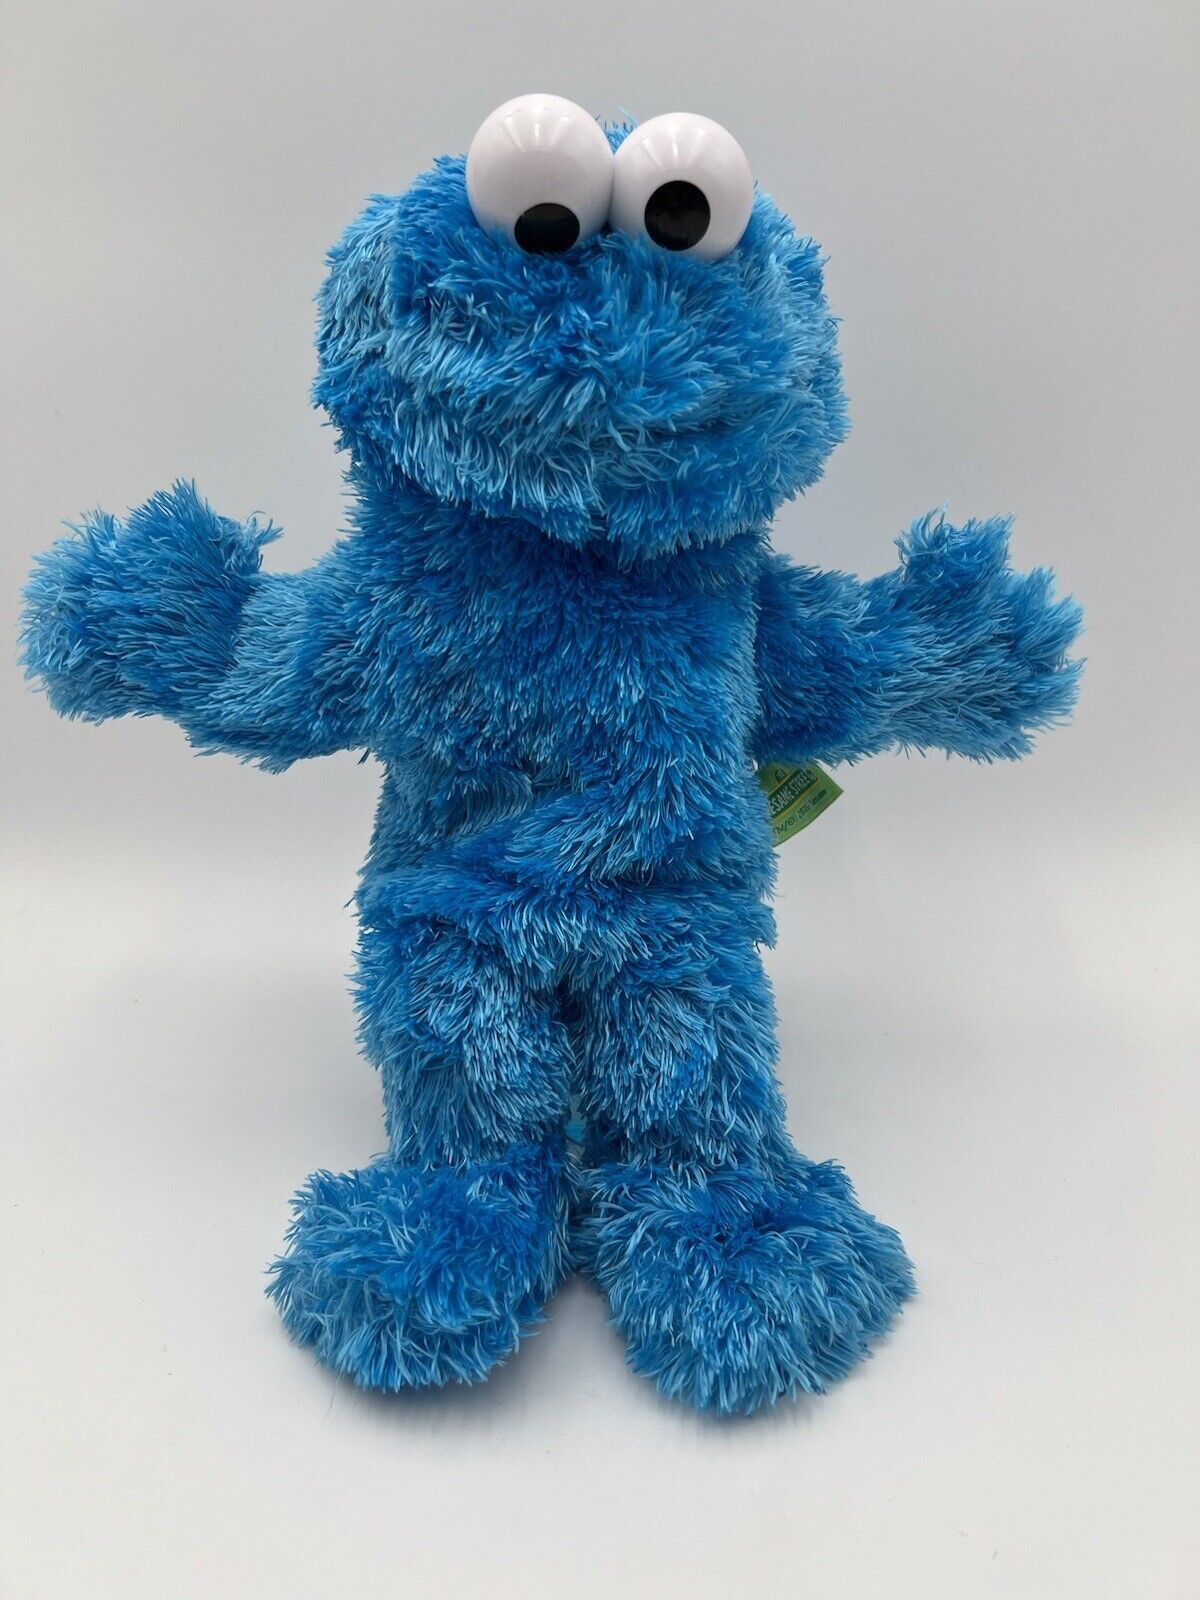 Cookie Monster Hand Puppet - not sure if this is the exact one we